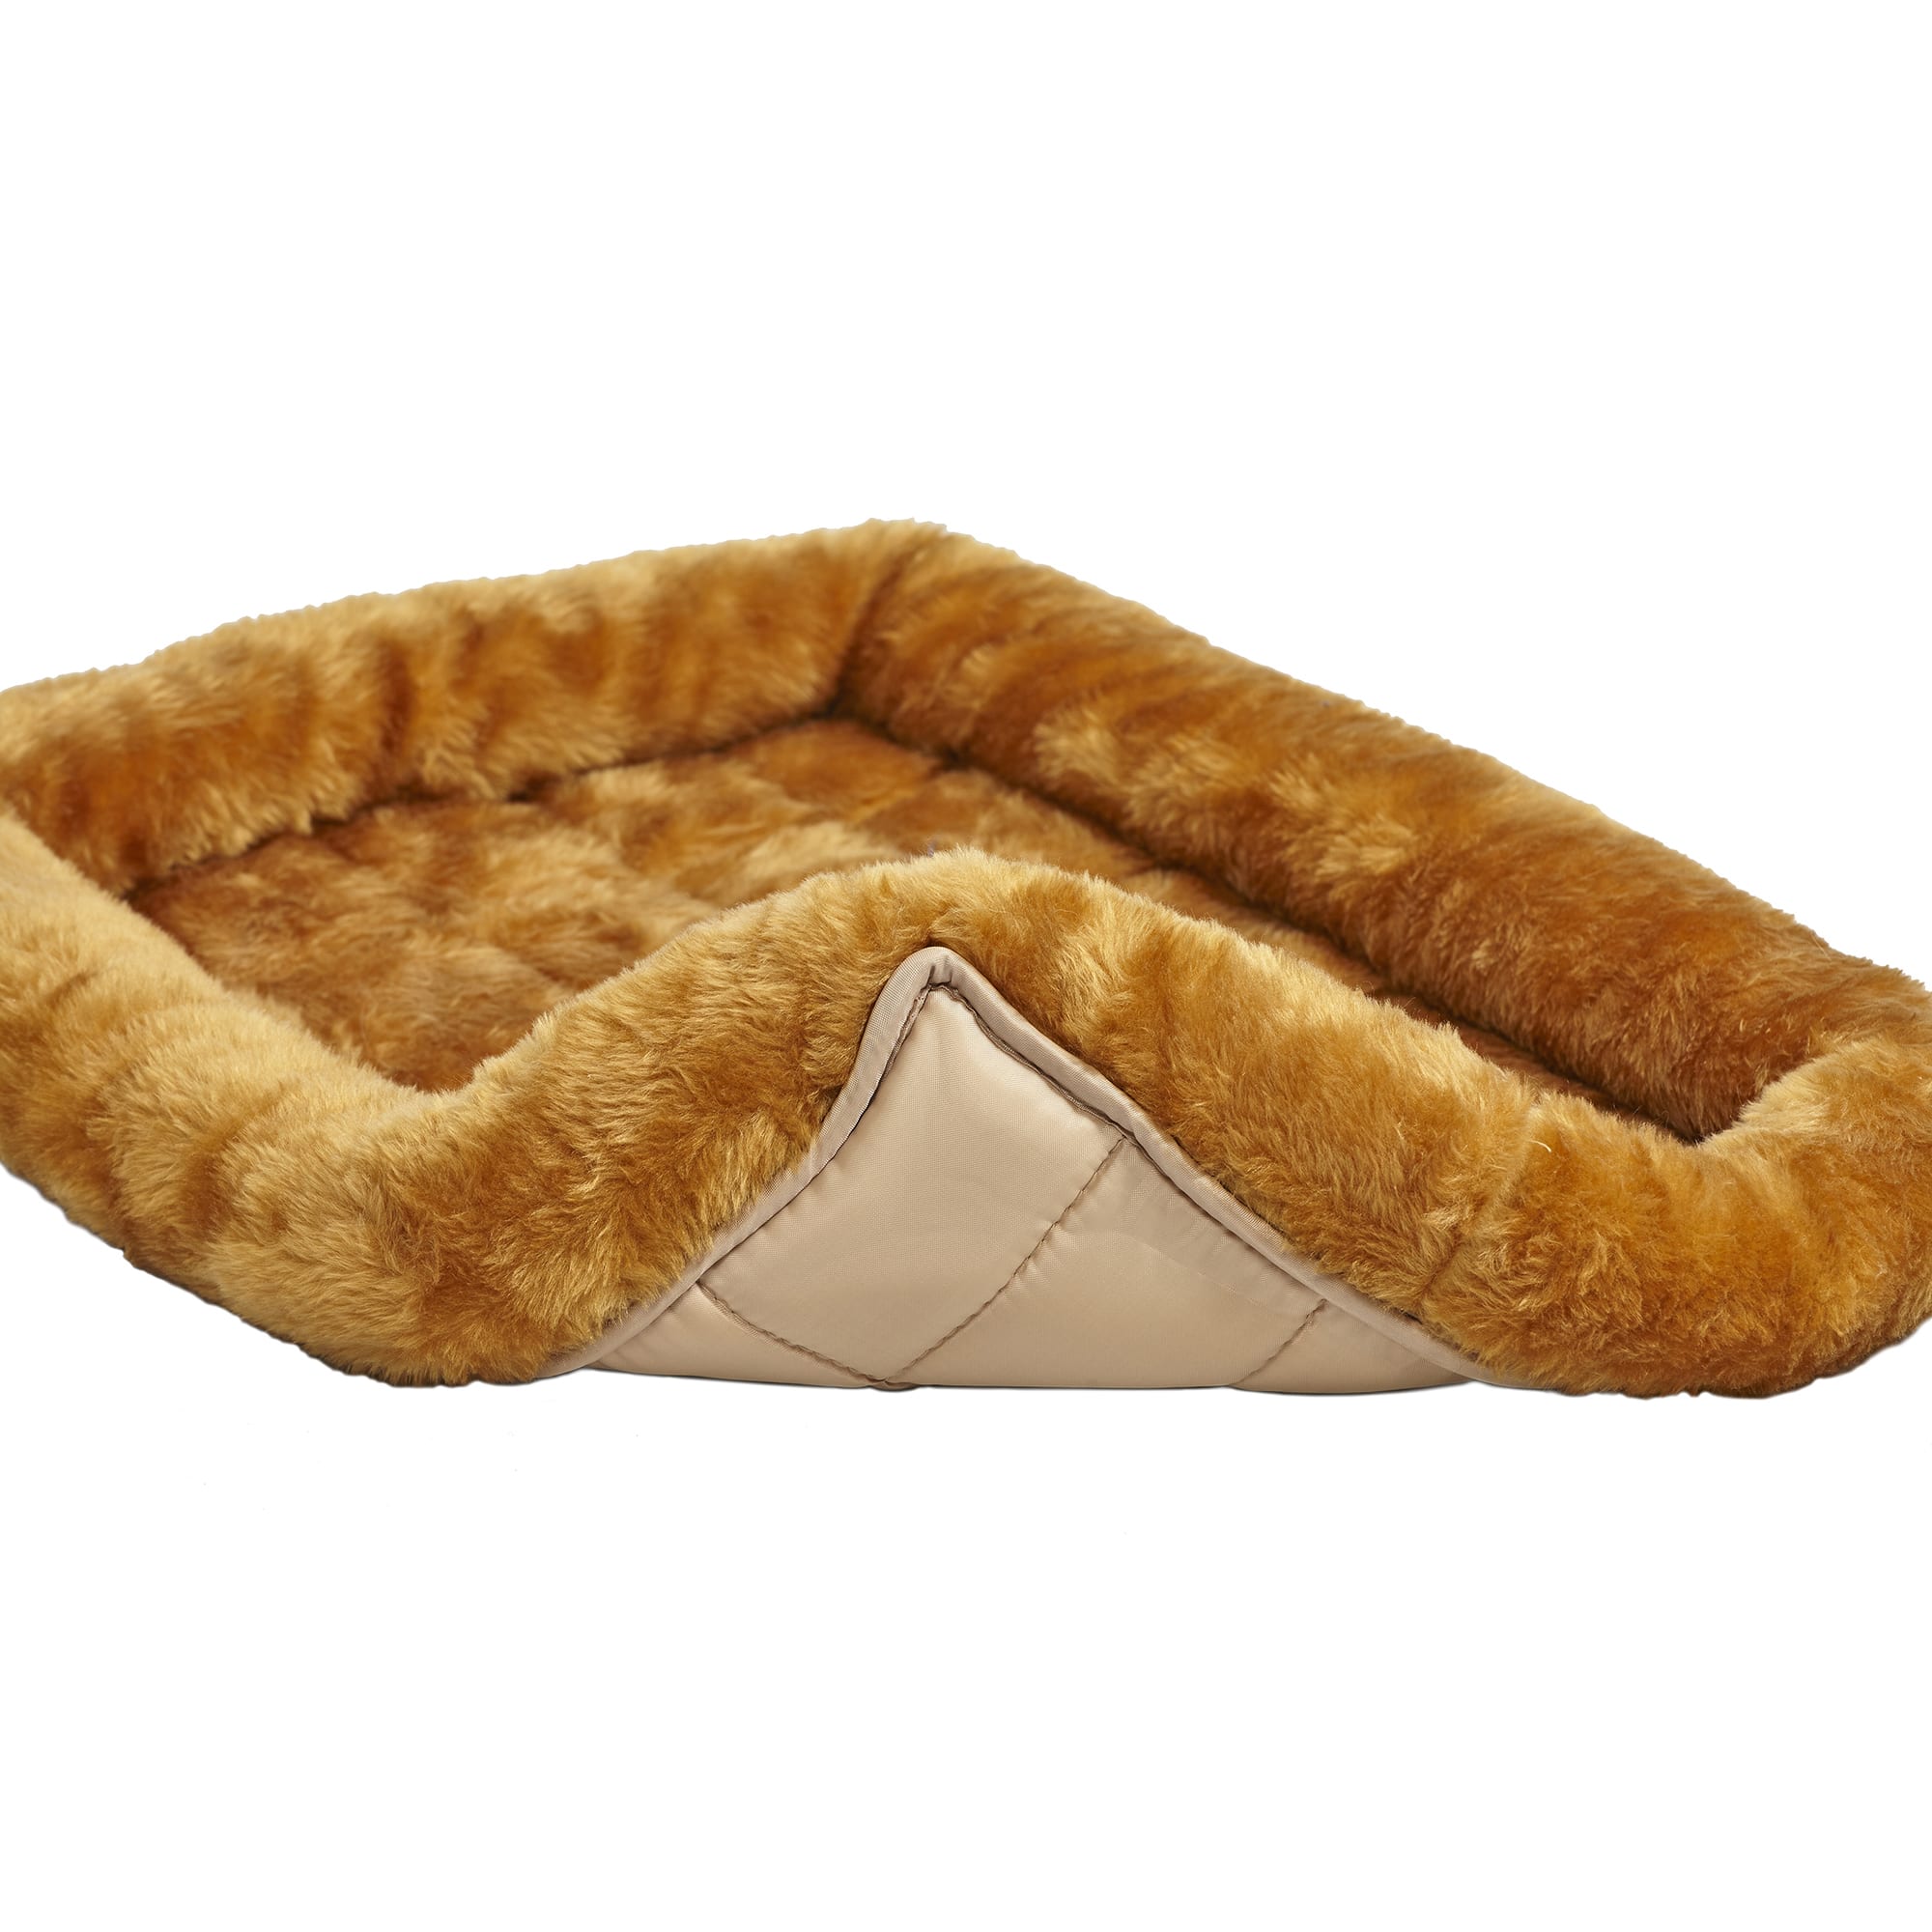 Midwest Quiet Time Bolster Cinnamon Dog Bed, 22